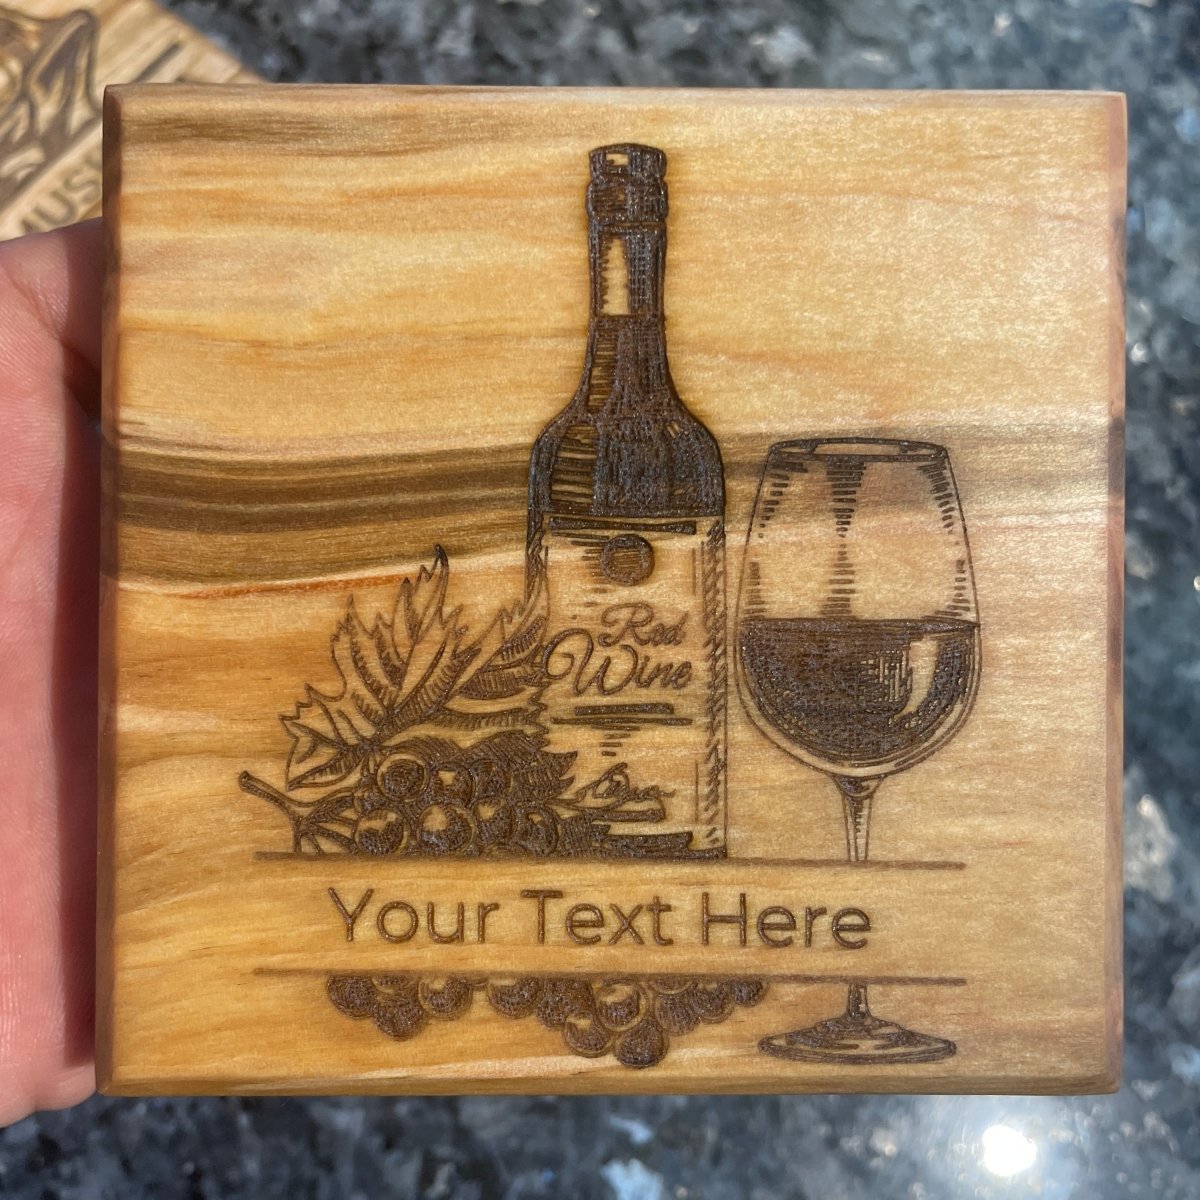 Coaster Set of 4 Wine Theme with personalized text - DaRosa Creations